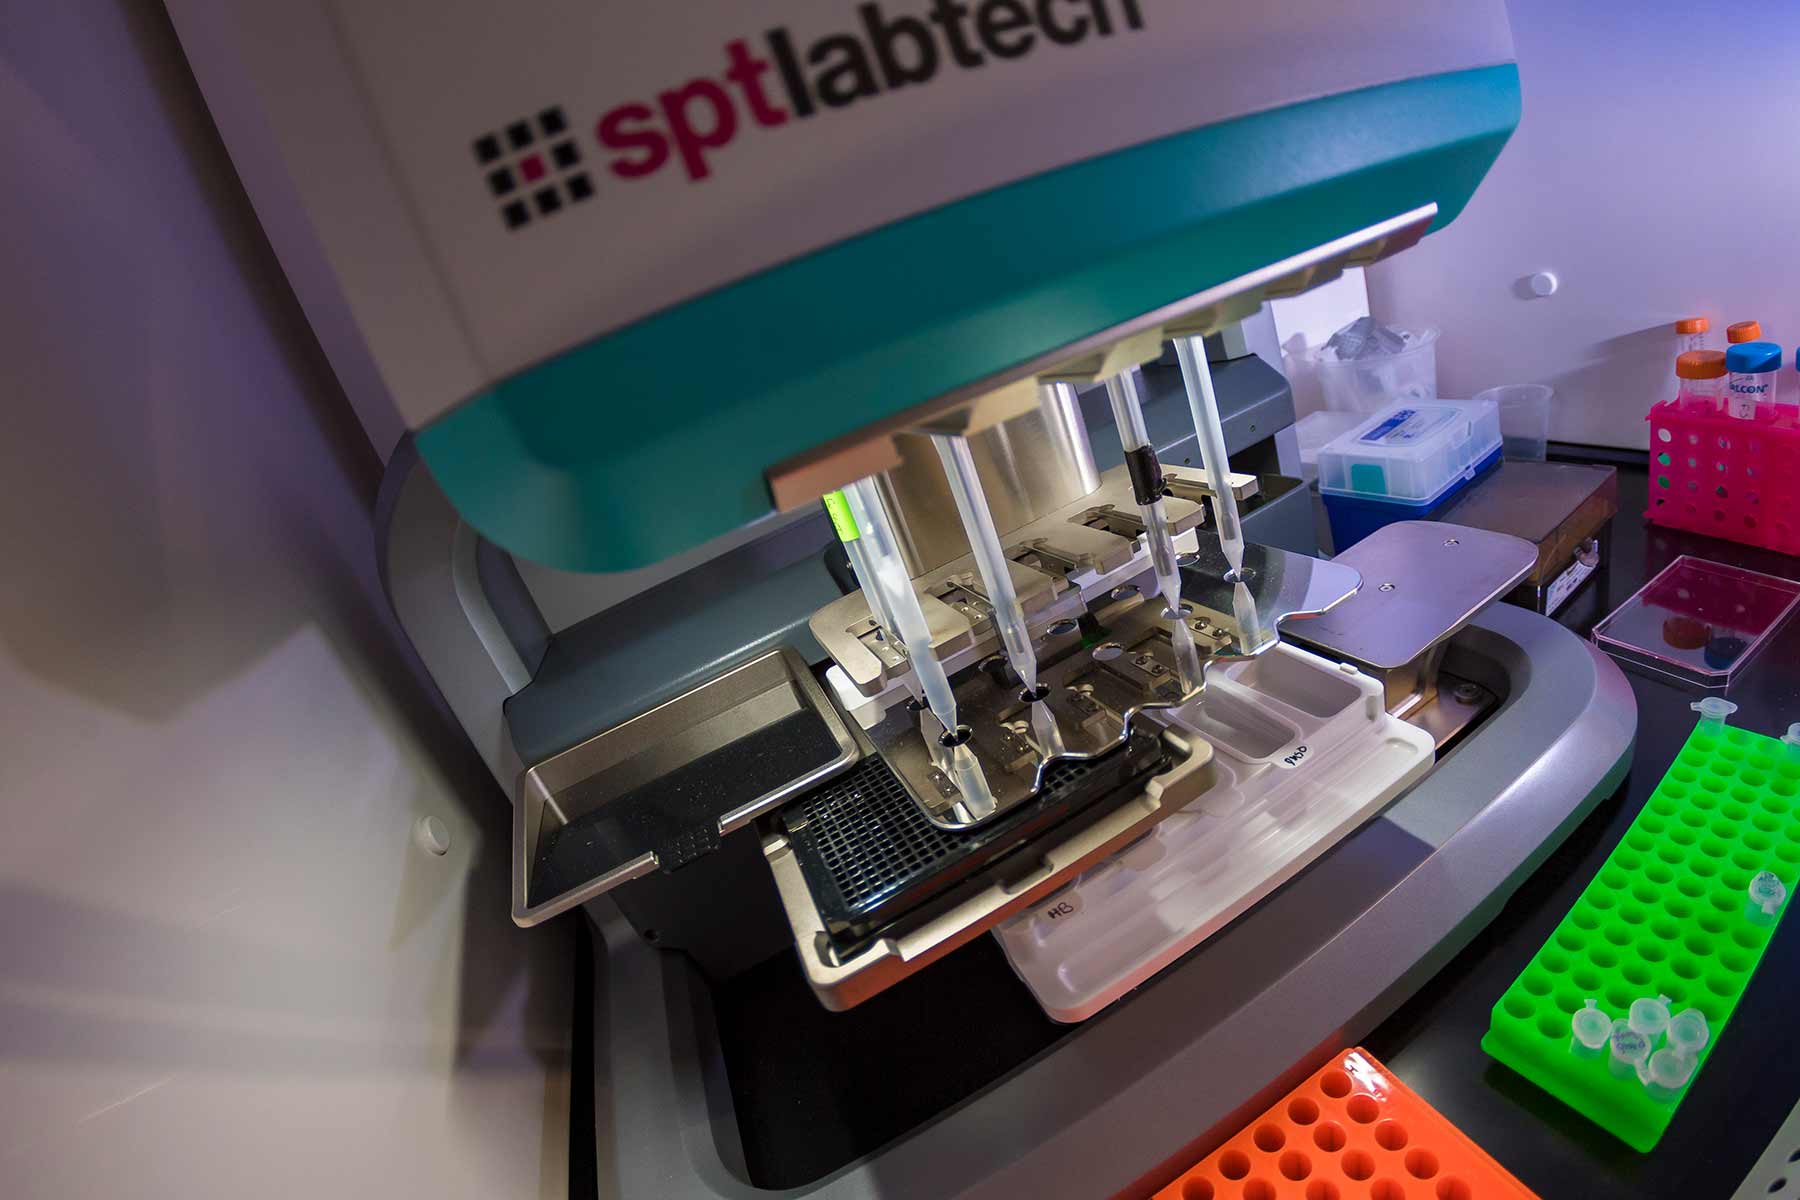 A pipetting robot dilutes samples into a plate for imaging in the Illumina Laboratory.